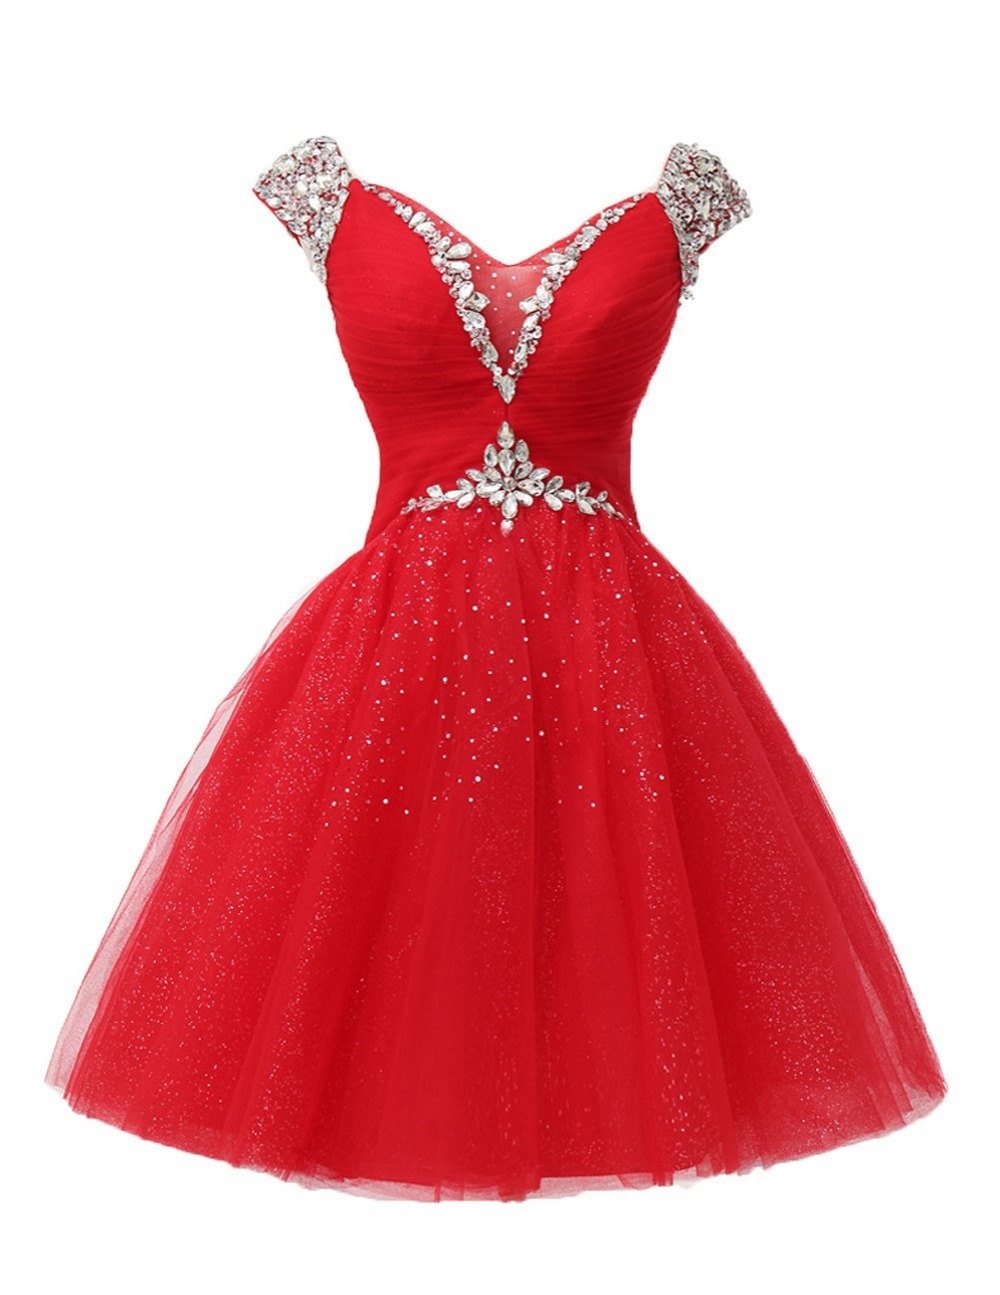 Red Graduation Cocktail Dress, Rhinestone Short Evening Dress, V Neck Crystal Tulle Mini Prom Dress, Women Party Dress, Formal Gowns